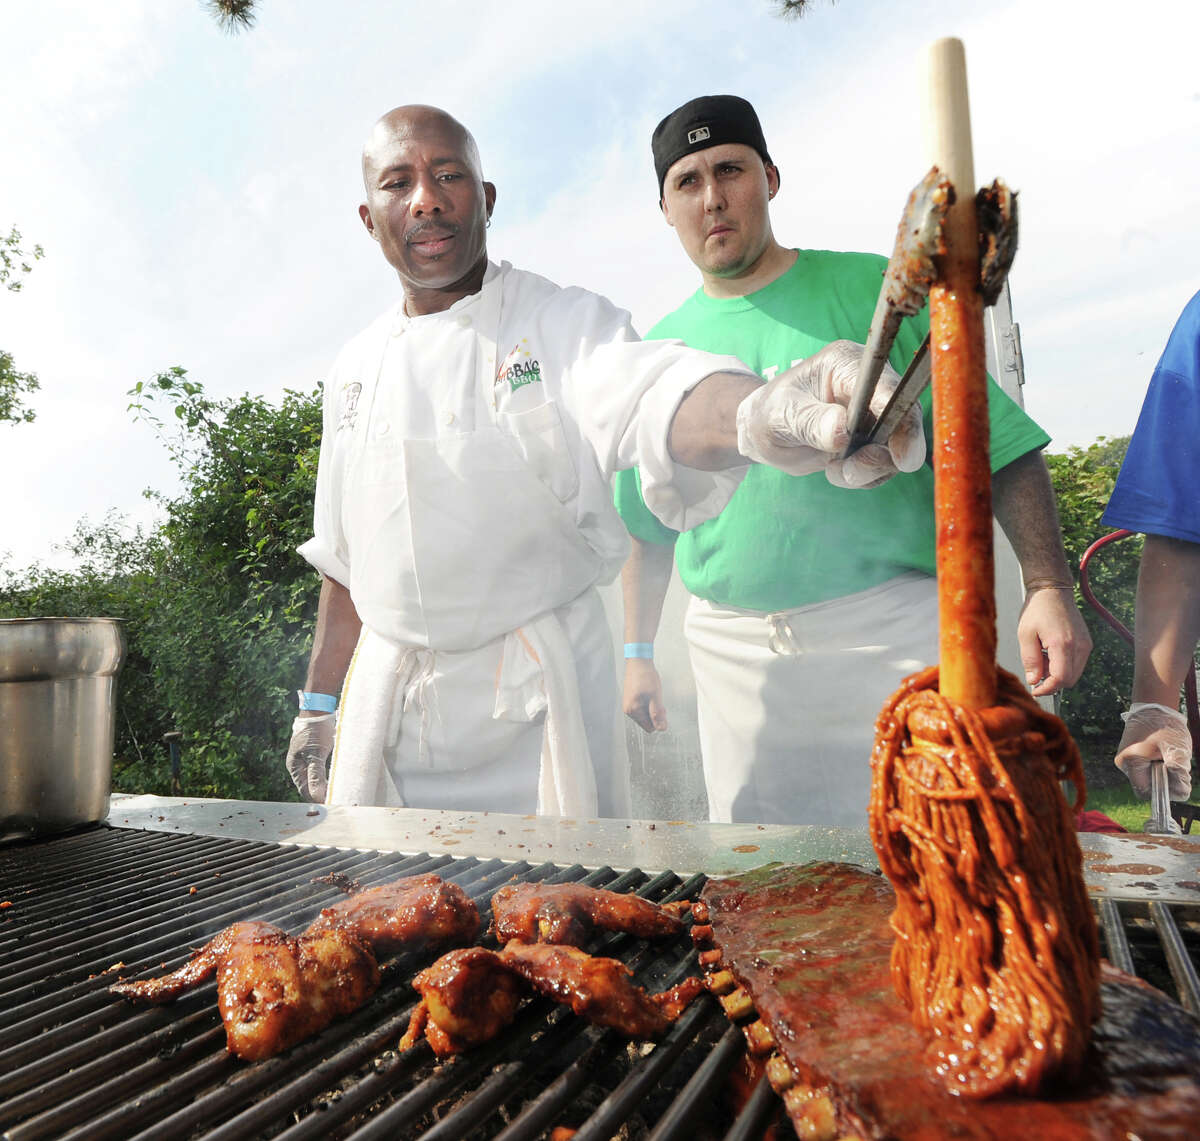 At left, chef Francis Collymore of Big Bubba's BBQ, spreads Memphis barbecue sauce on pork ribs while Raymond Lopez, an assistant chef, looks on, during the second annual Greenwich Food and Wine Festival at Roger Sherman Baldwin Park in Greenwich, Saturday, Oct. 6, 2012. The restaurant is located at the Mohegan Sun Resort and is owned by Greenwich resident Godfrey Polistina. The event benefits the Hole in the Wall Gang Camp, a nonprofit that runs camps for children coping with cancer, sickle cell anemia and other serious illnesses.